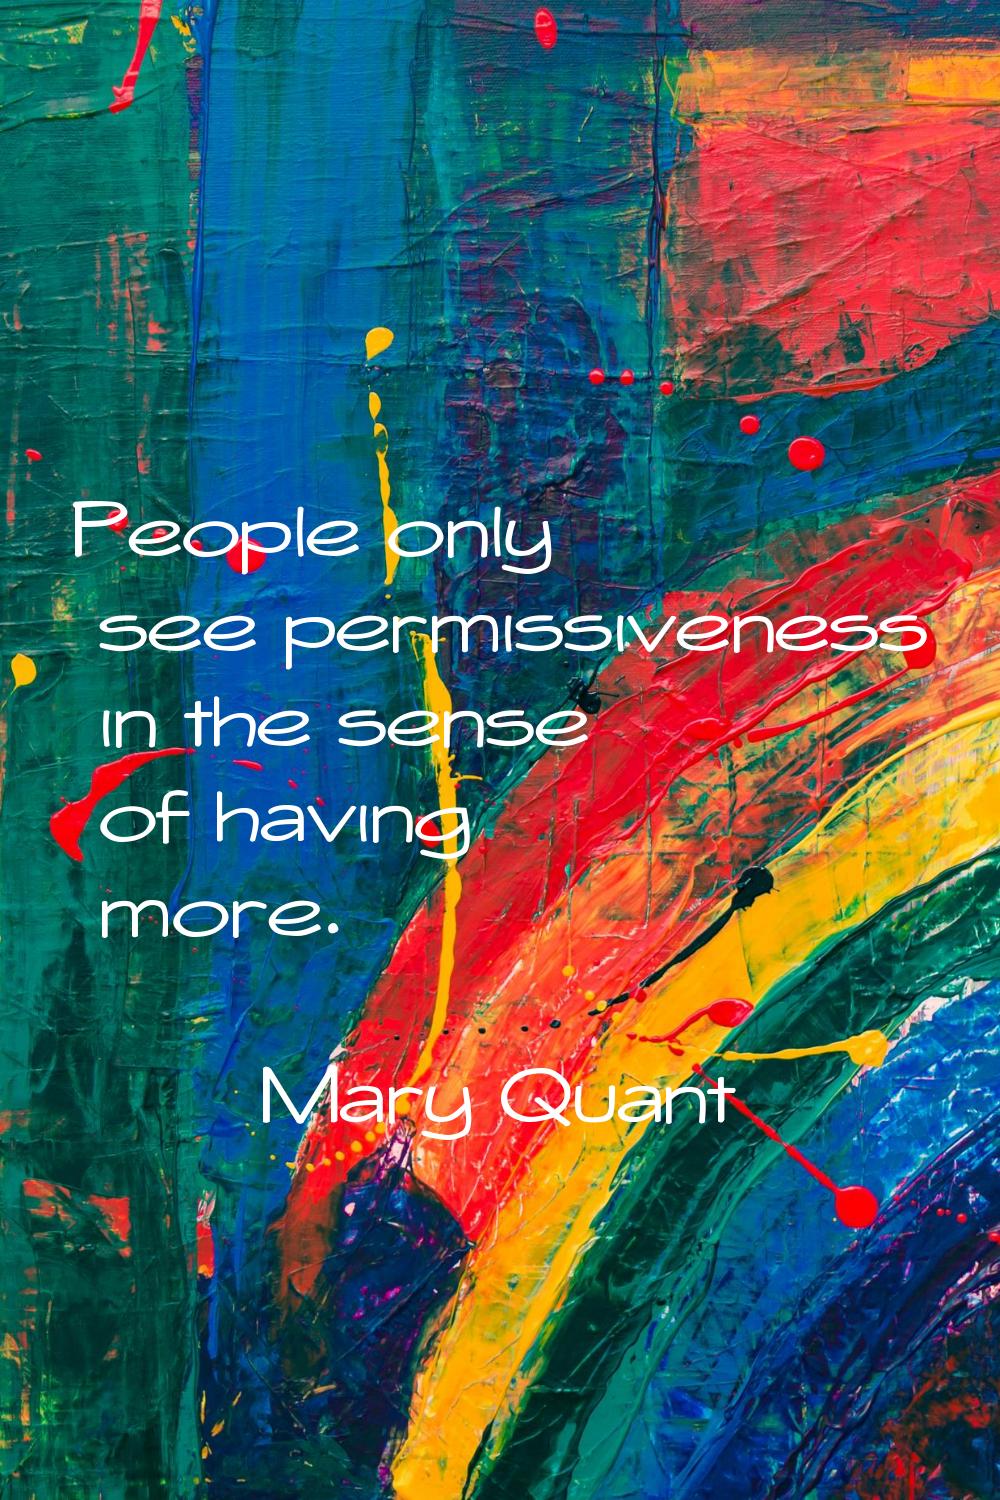 People only see permissiveness in the sense of having more.